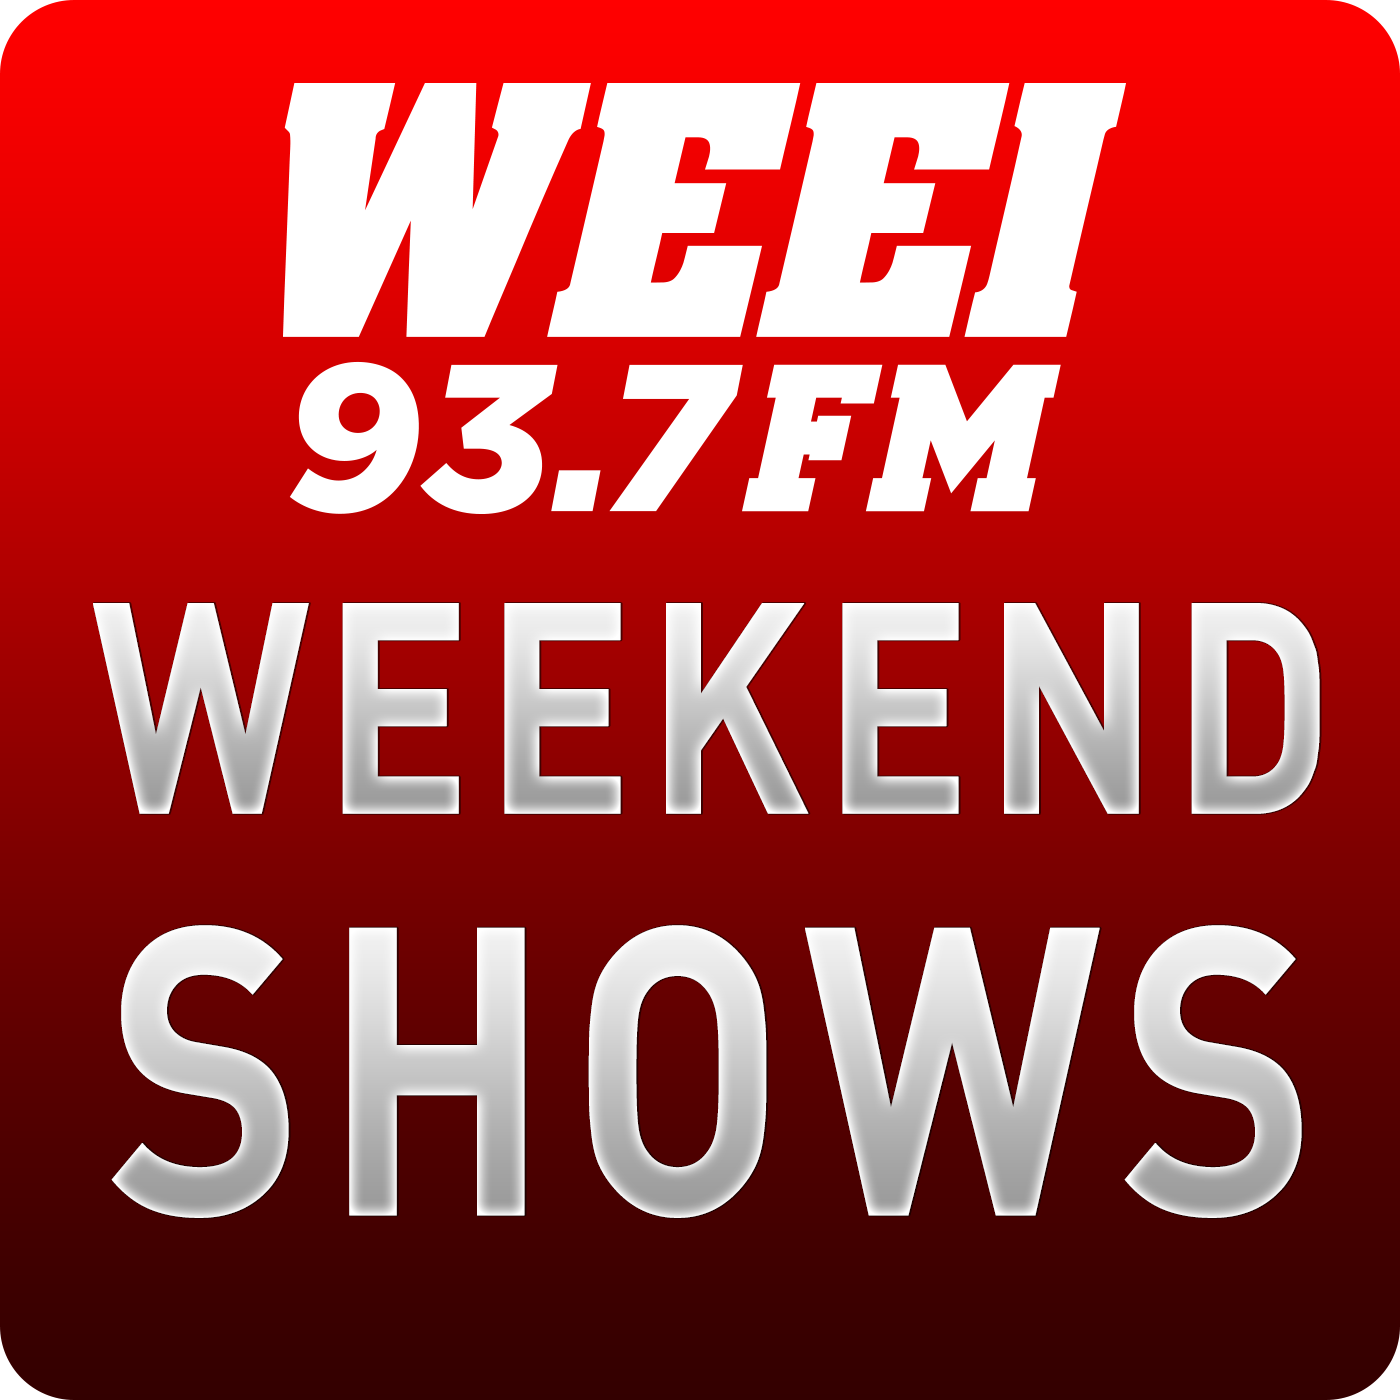 Ken and Fitzy - WEEI Red Sox writer Rob Bradford explains why this week "is one of the most important weeks in the history of baseball"; New Hampshire extends shut down after Massholes invade - 5-30-20